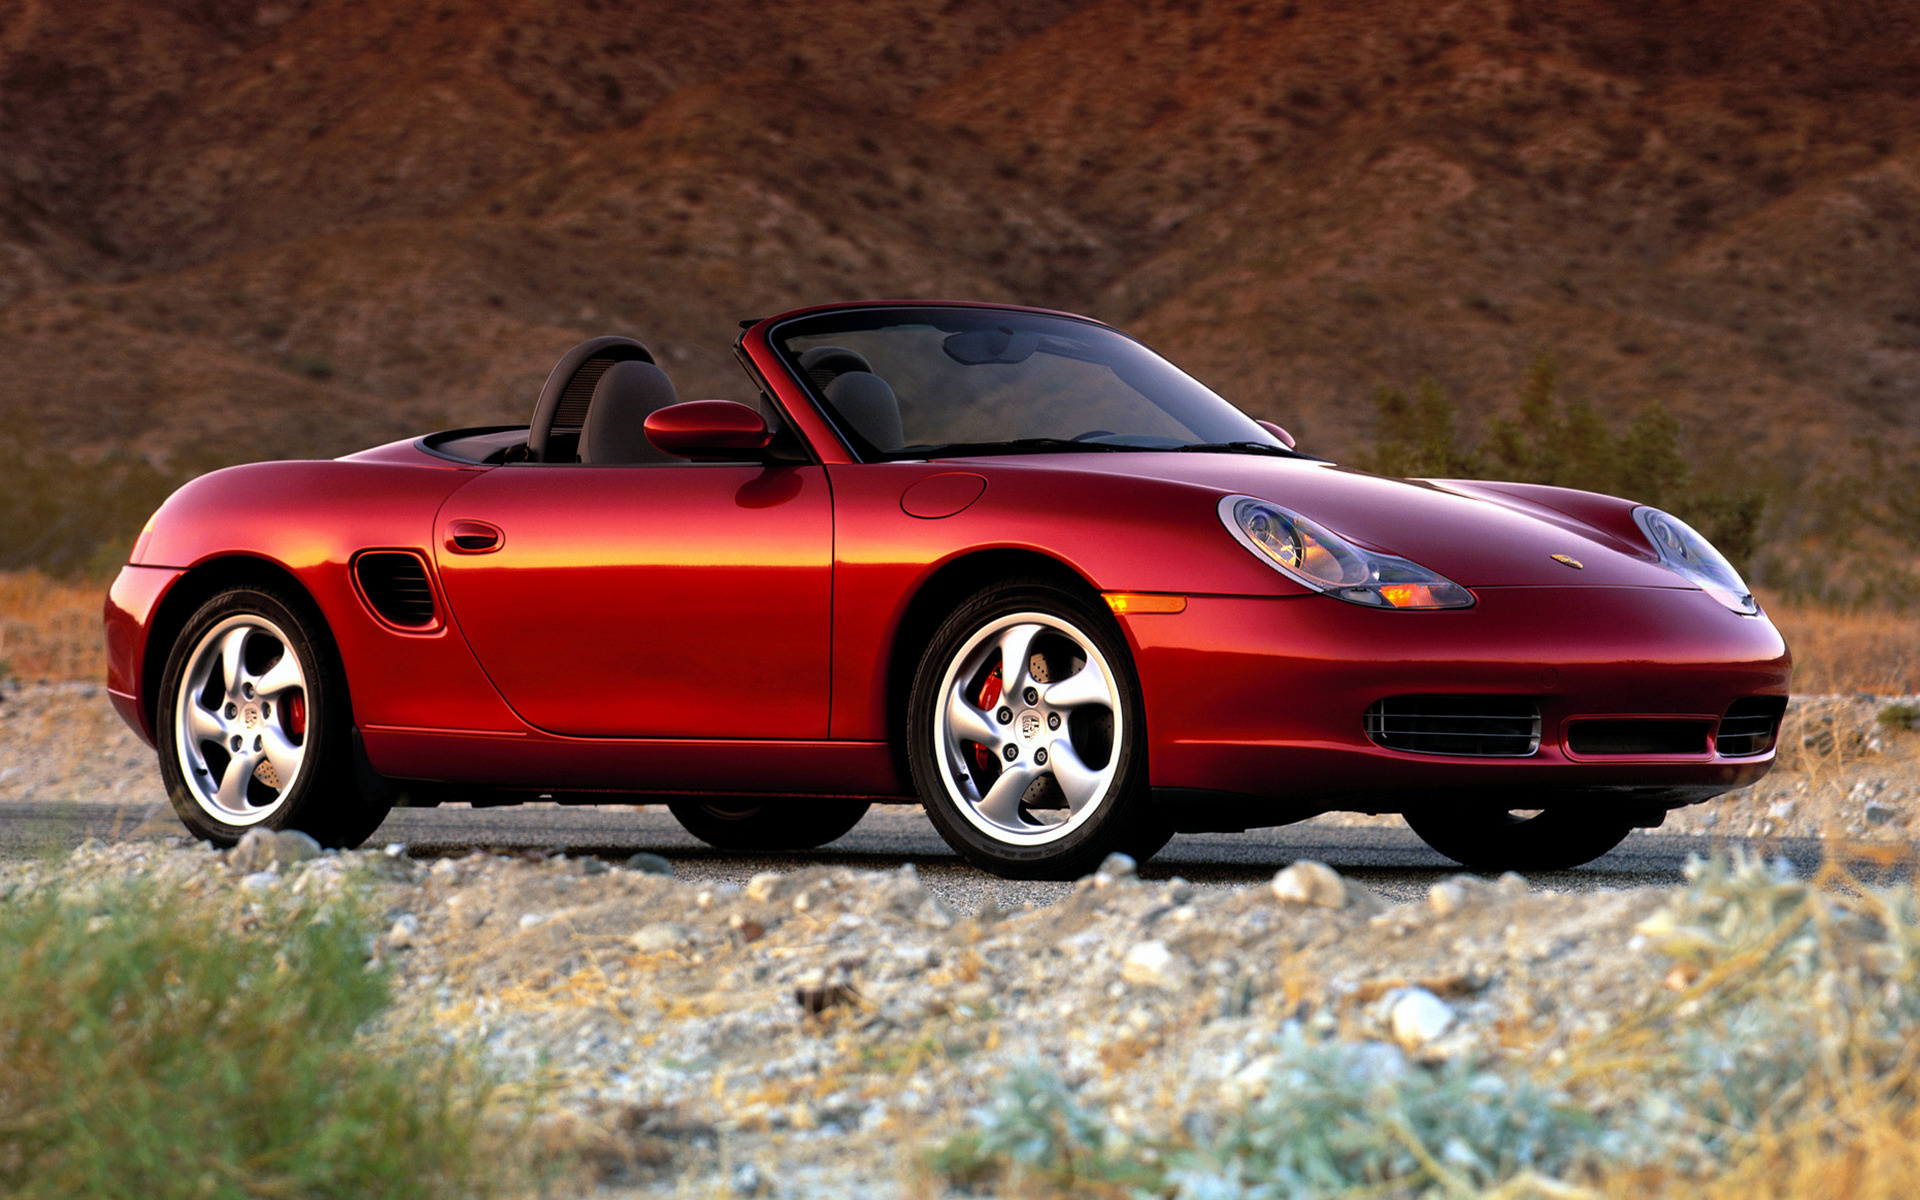 Porsche Boxster S (2000) – Specifications & Performance